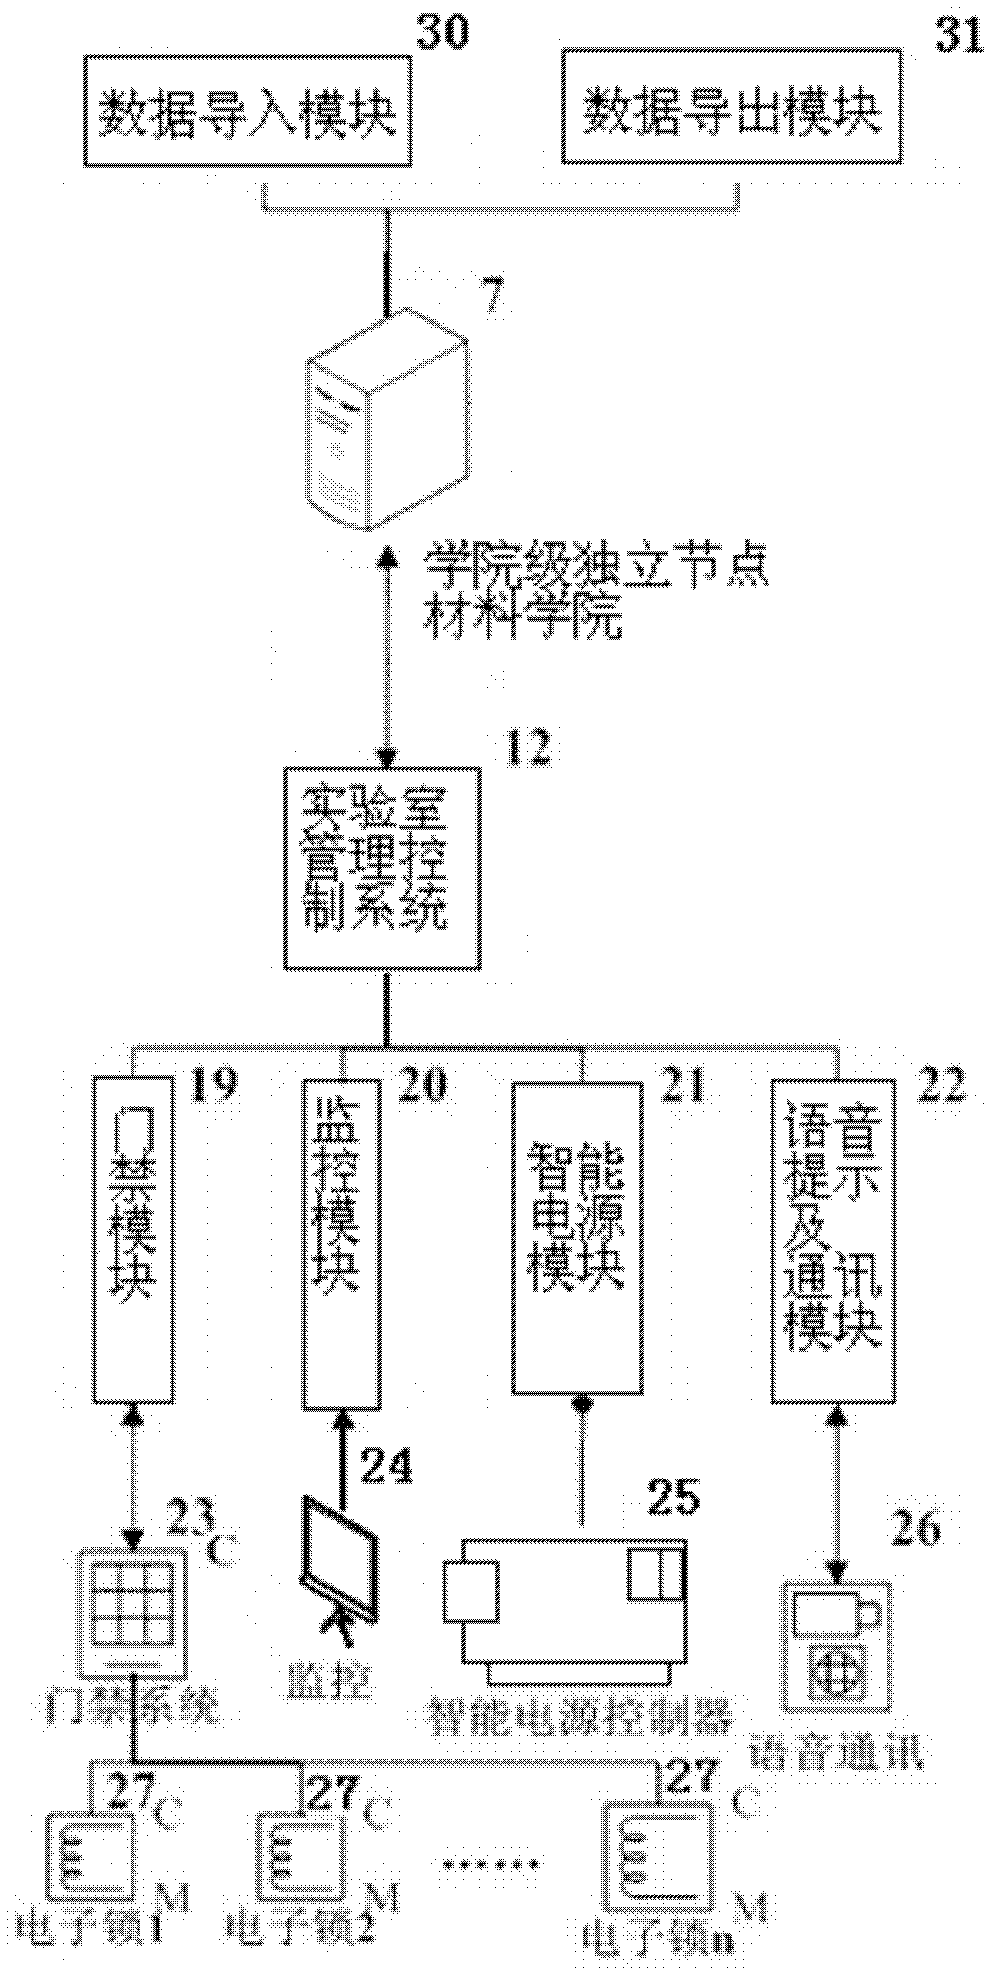 System and method for open intelligent management of laboratory